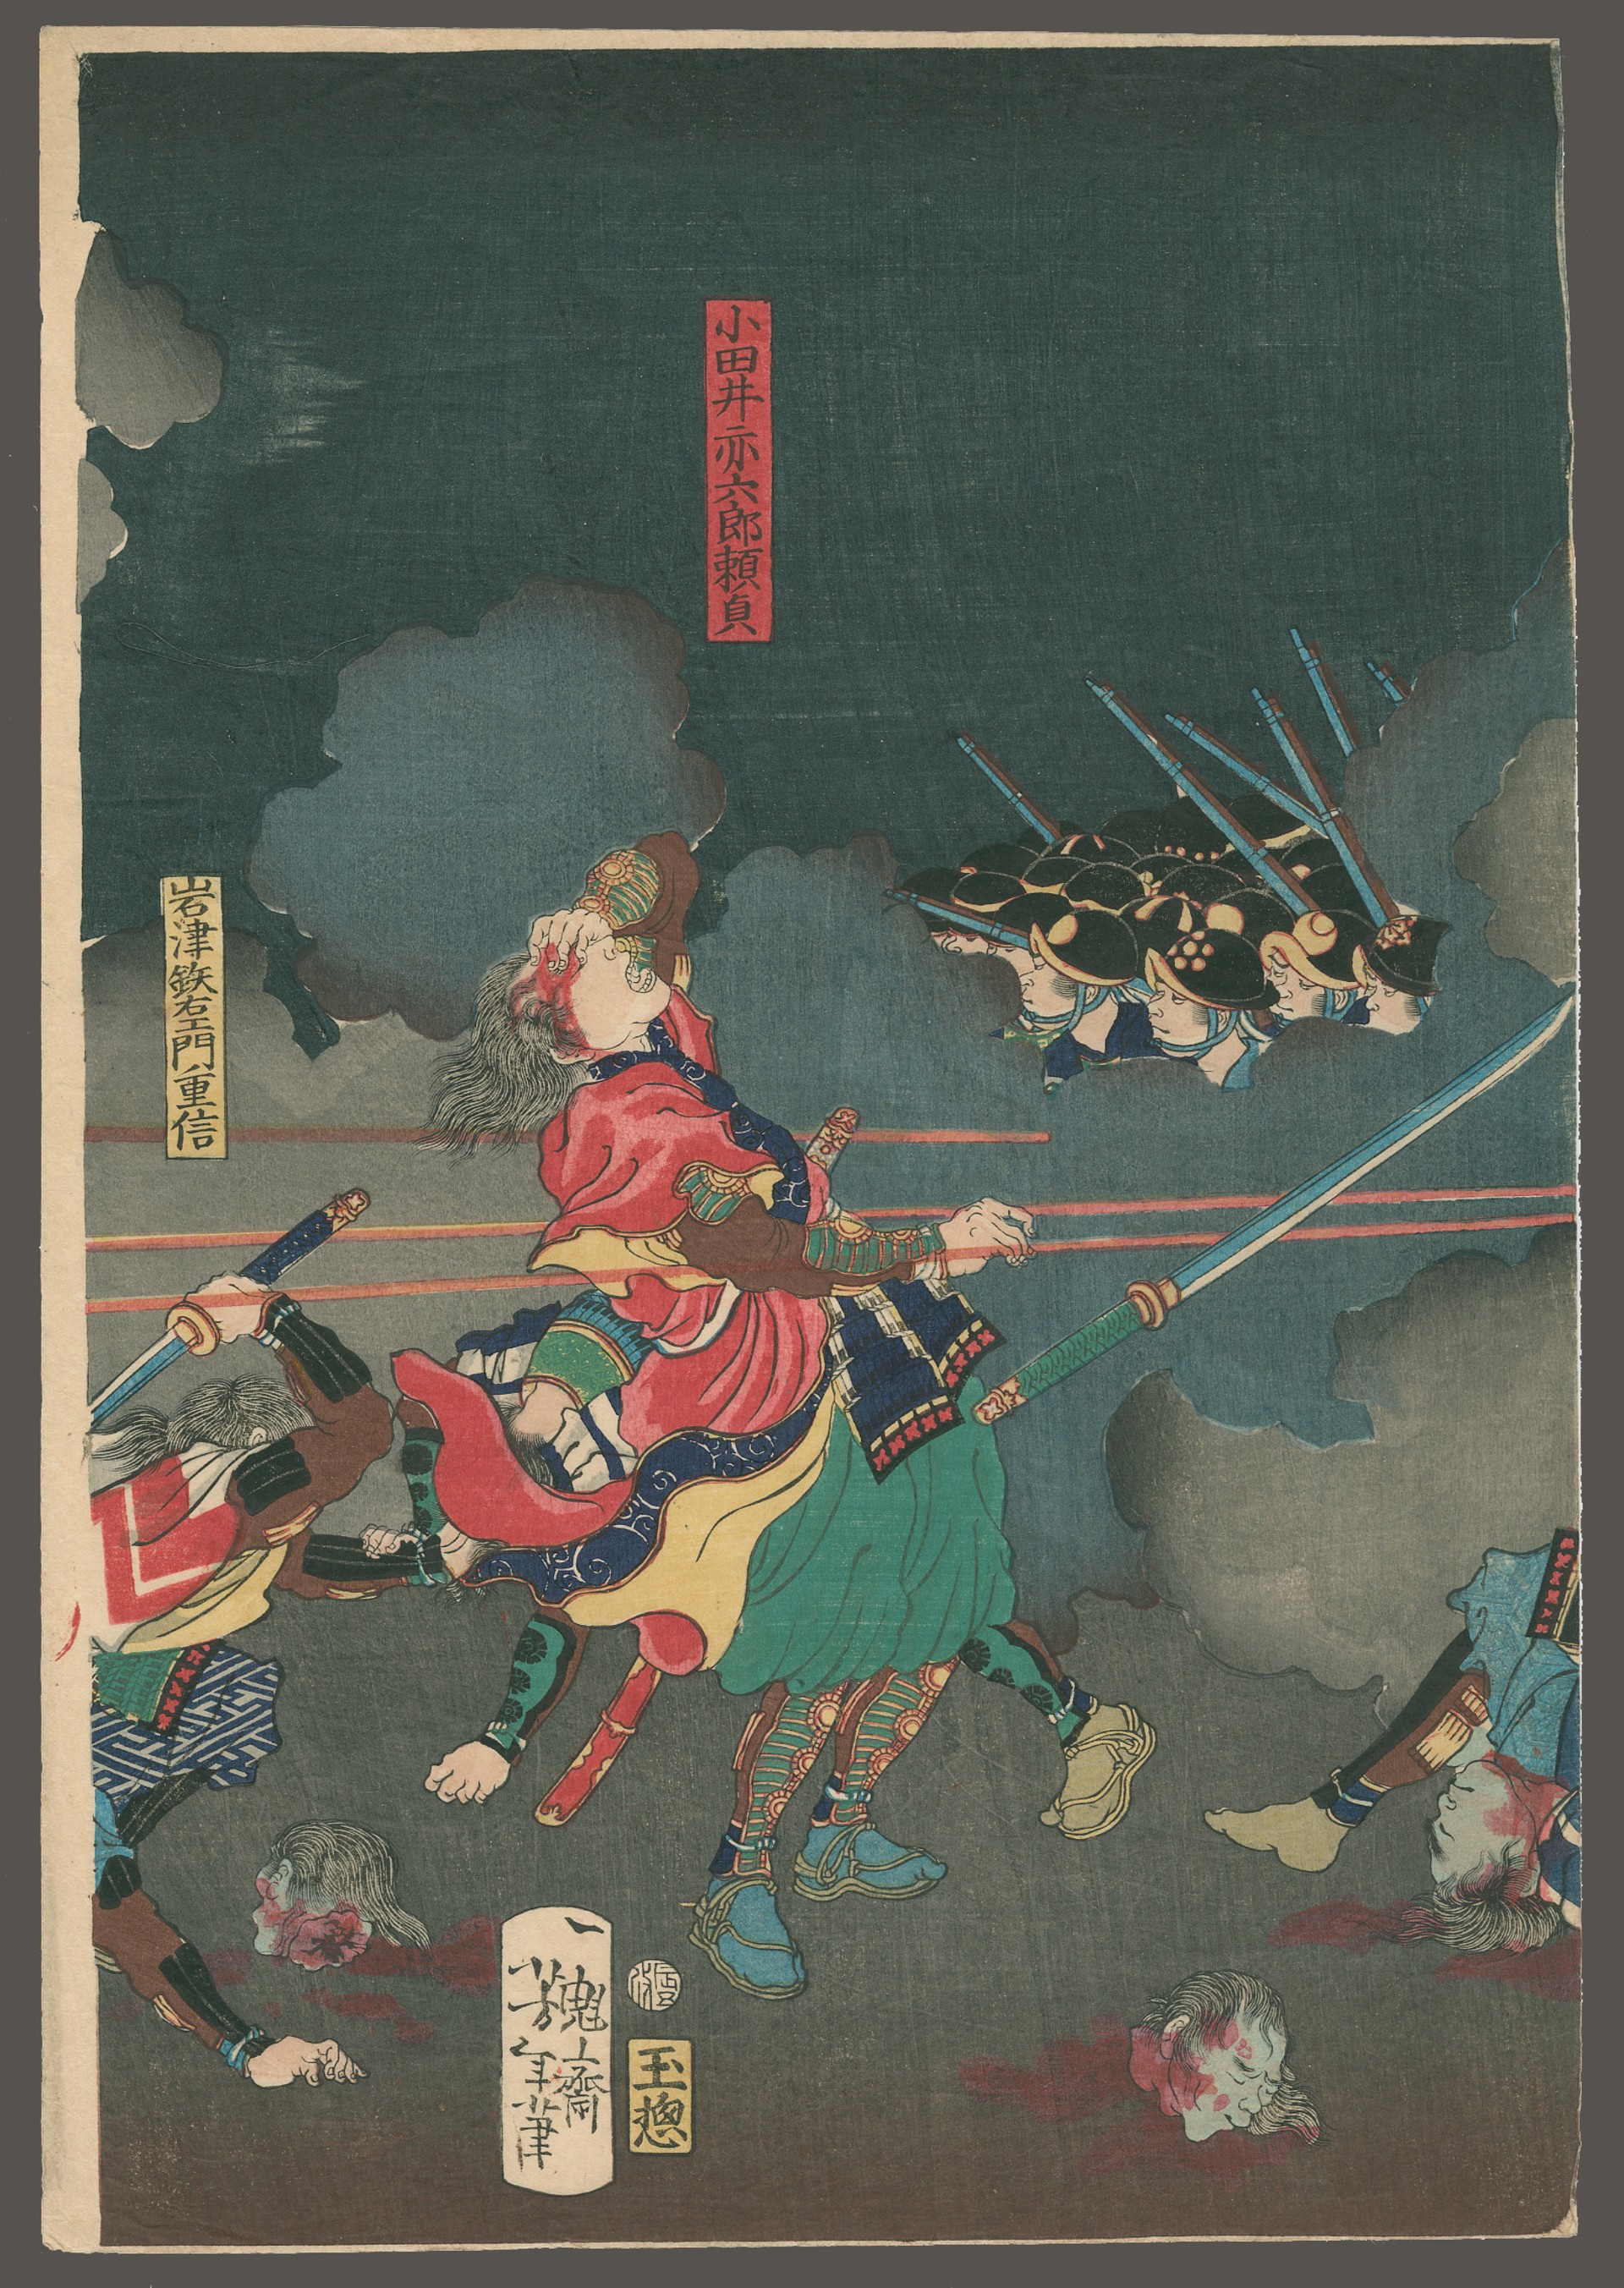 View of the Battle of Odai Castle in Shinano Province by Yoshitoshi